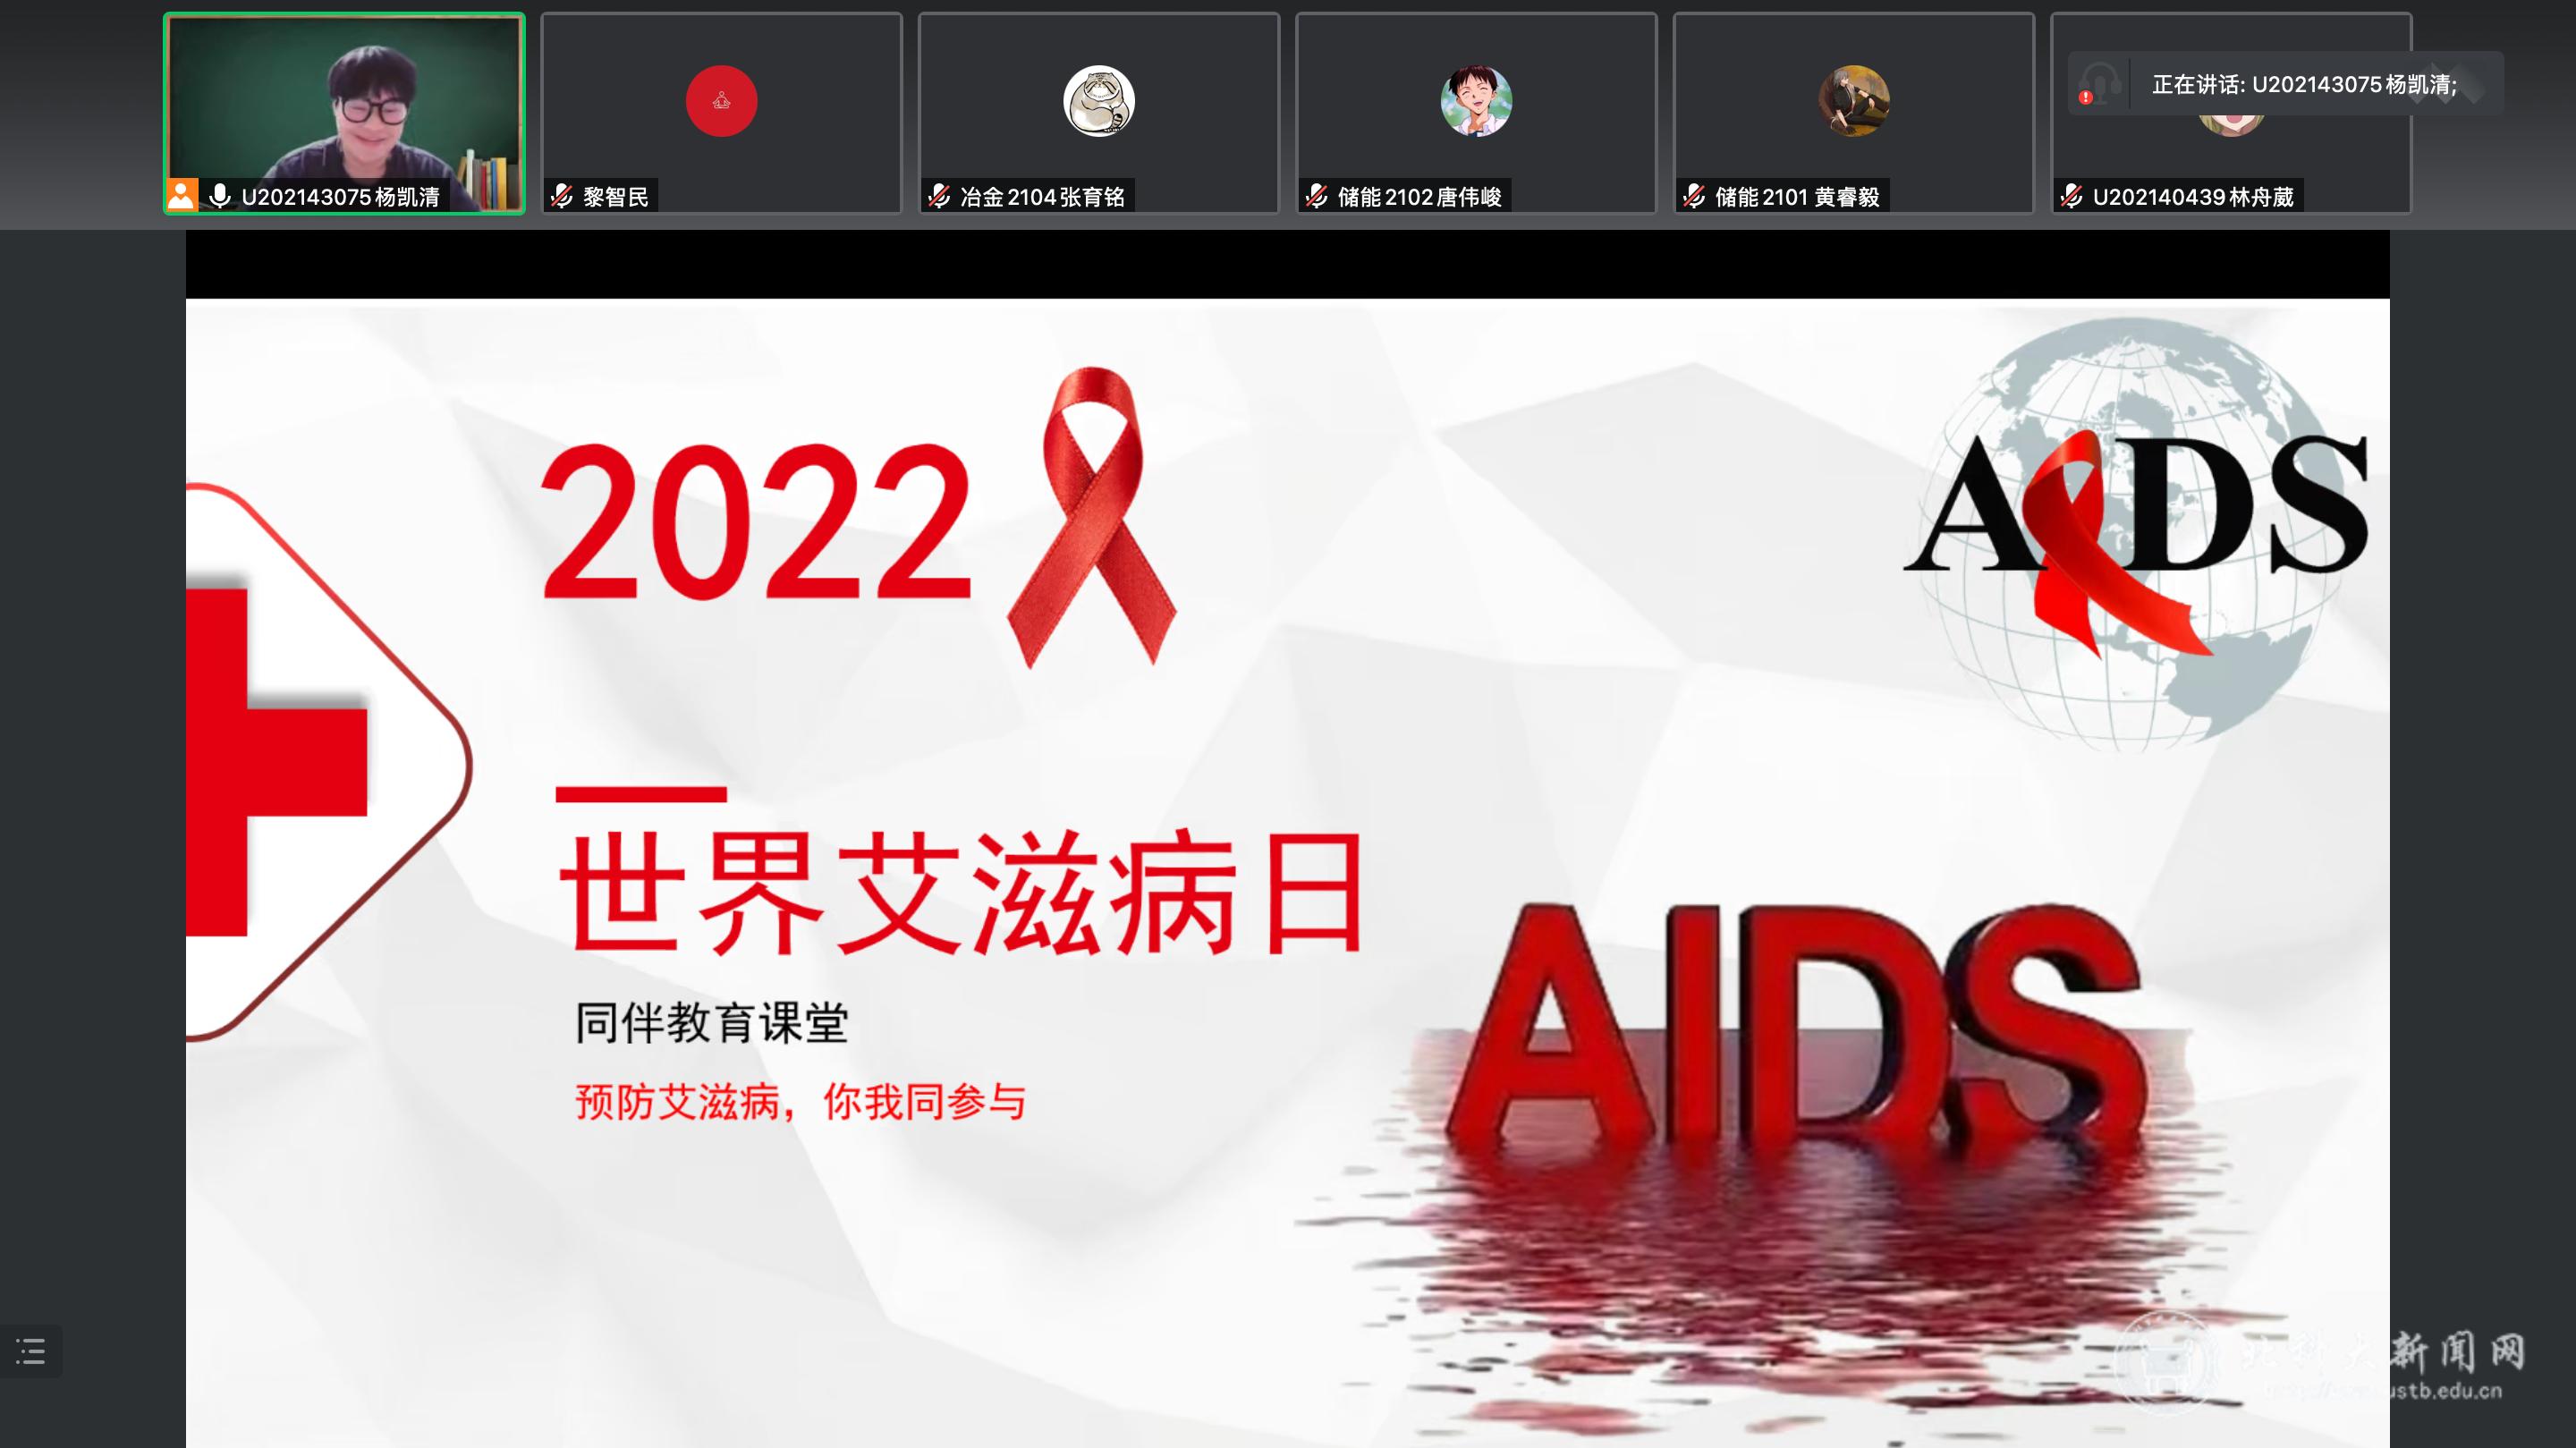 The Publicity Activity of World AIDS Day 2022 was Organized by the Office  of Population and Family Planning of USTB